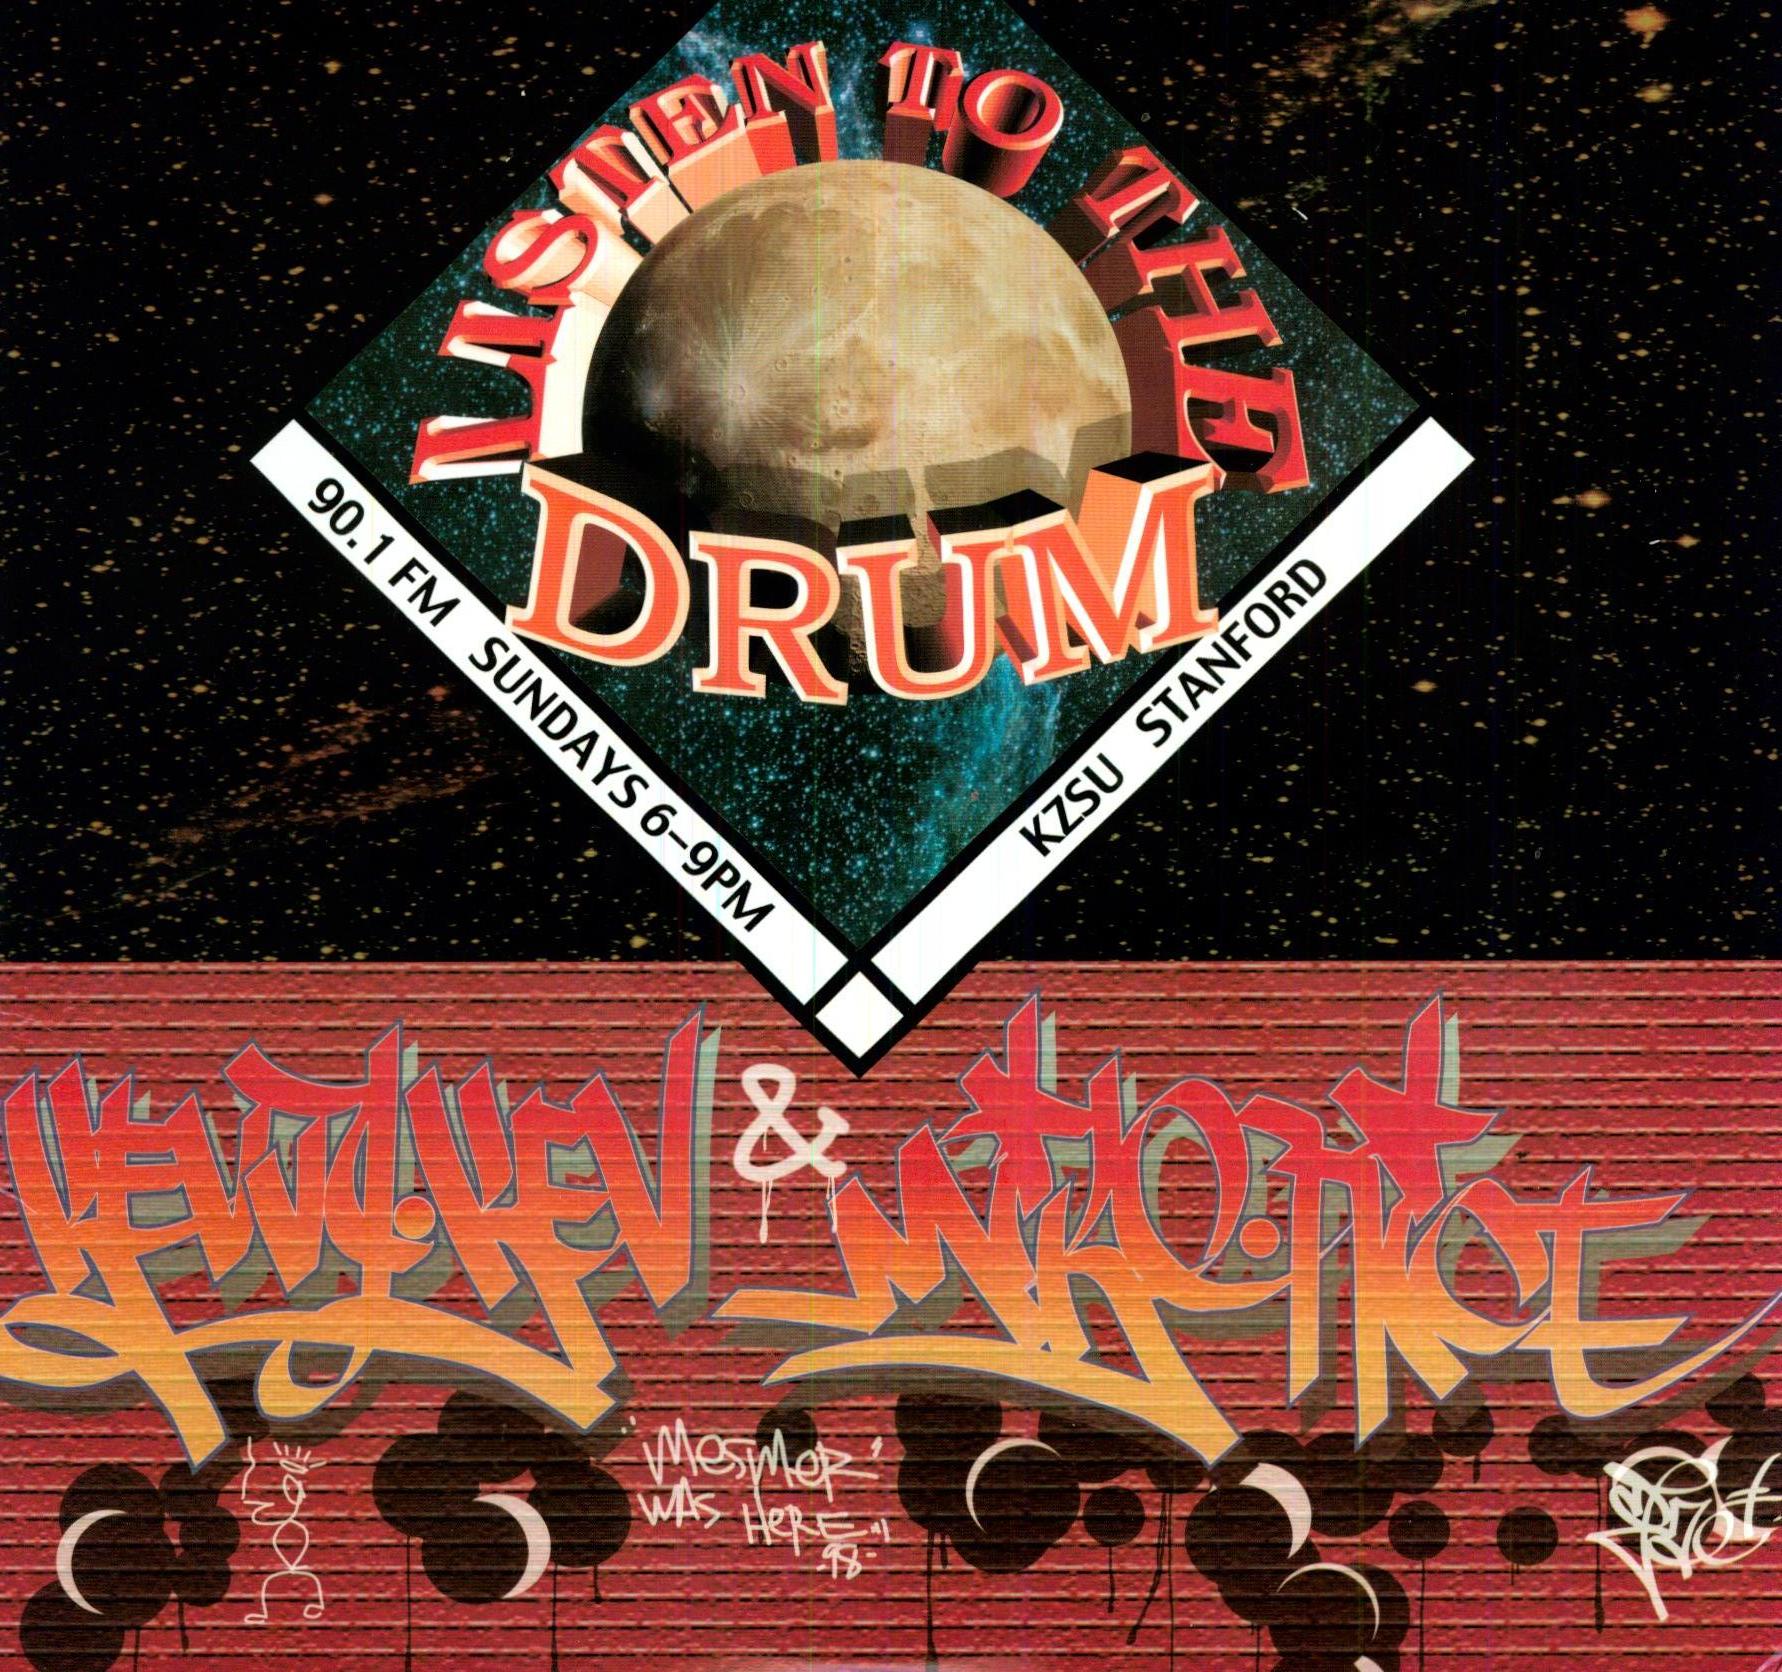 LISTEN TO THE DRUM / VARIOUS